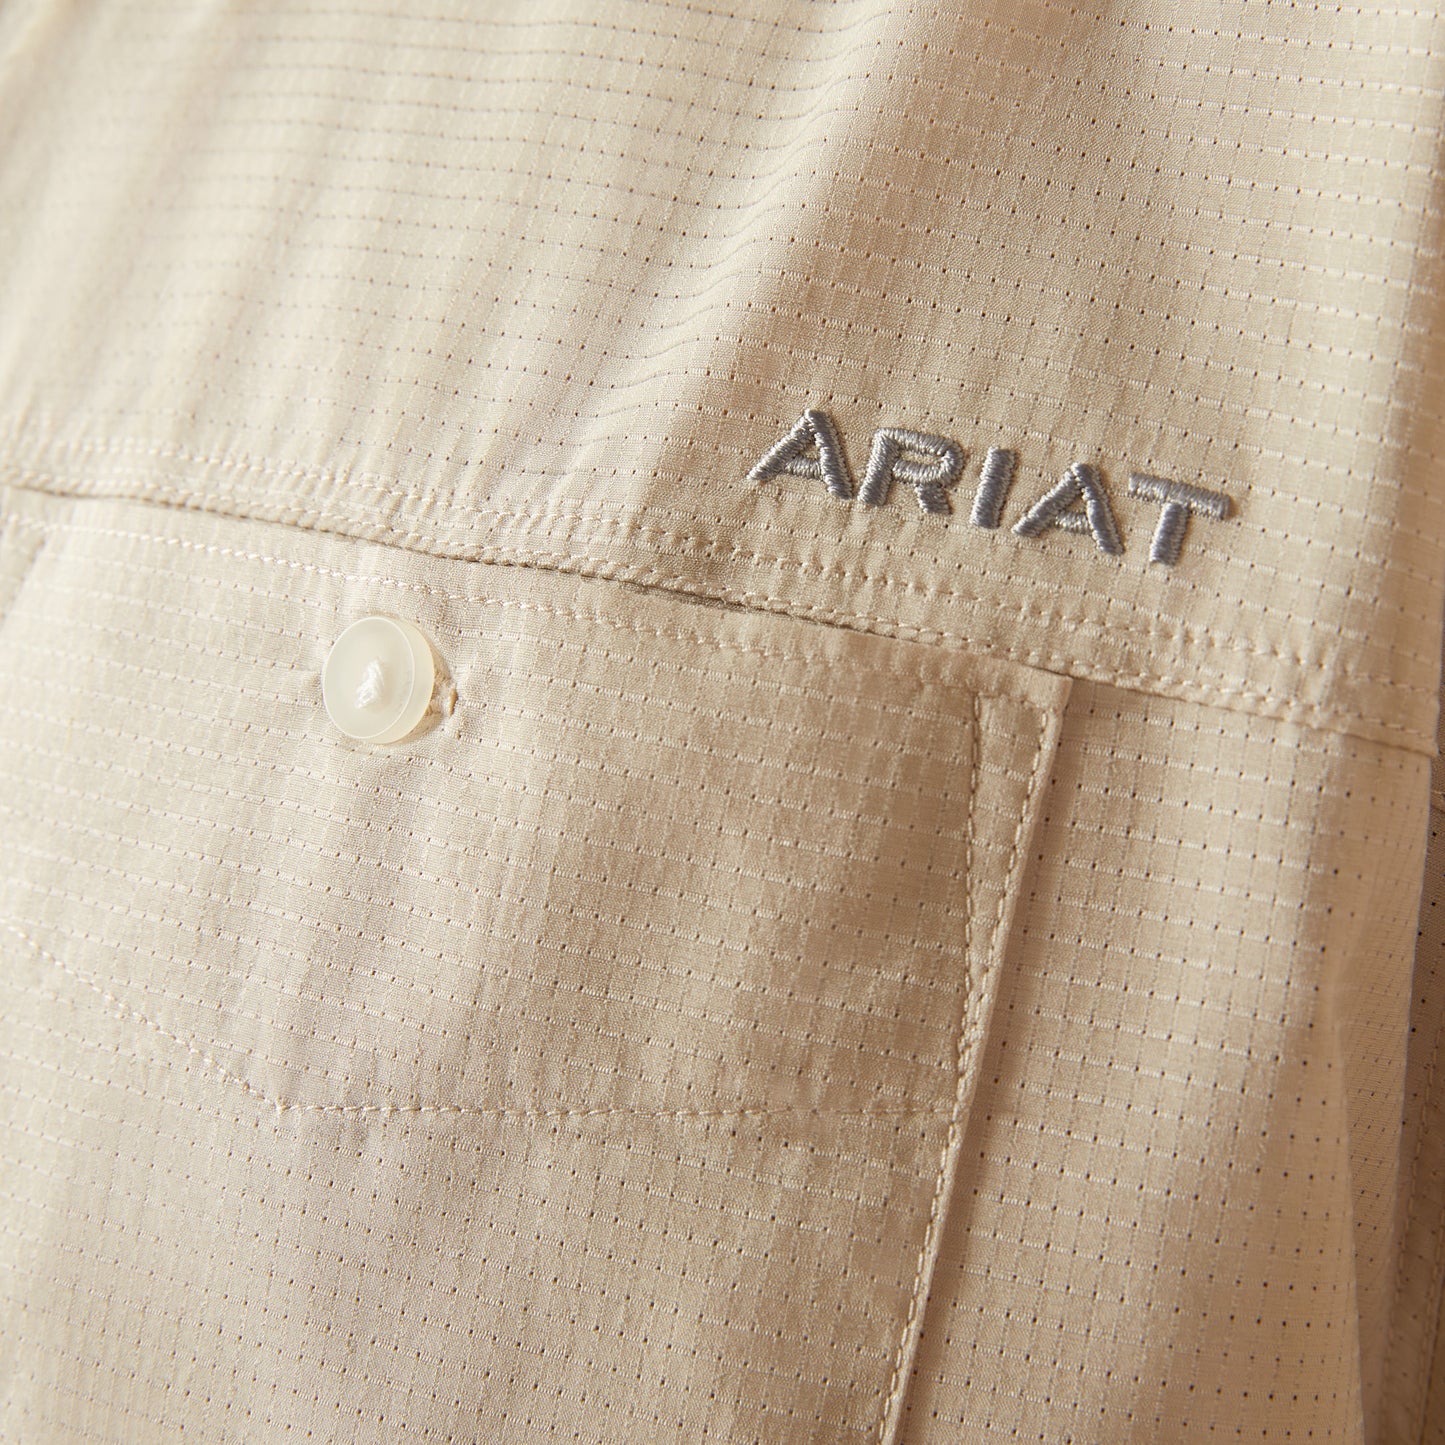 Ariat Silver Lining 360 AirFlow Classic Fit Shirt